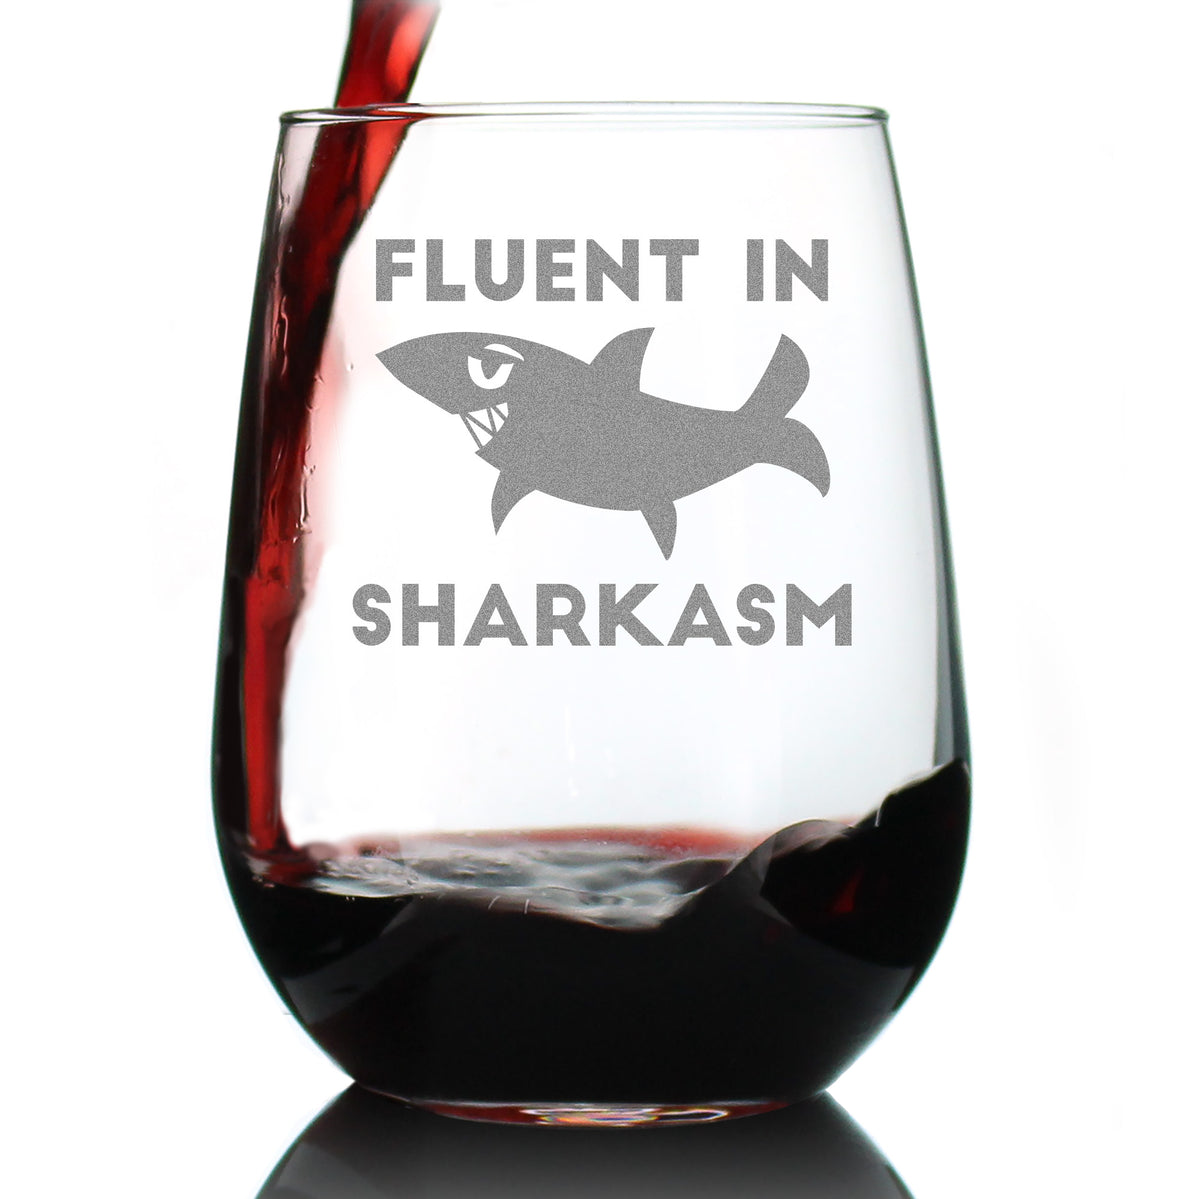 Fluent in Sharkasm - Shark Stemless Wine Glass Gifts for Sarcastic Mom or Dad Joke Experts - Funny Glasses with Sayings for Drinking - Large 17 Ounce